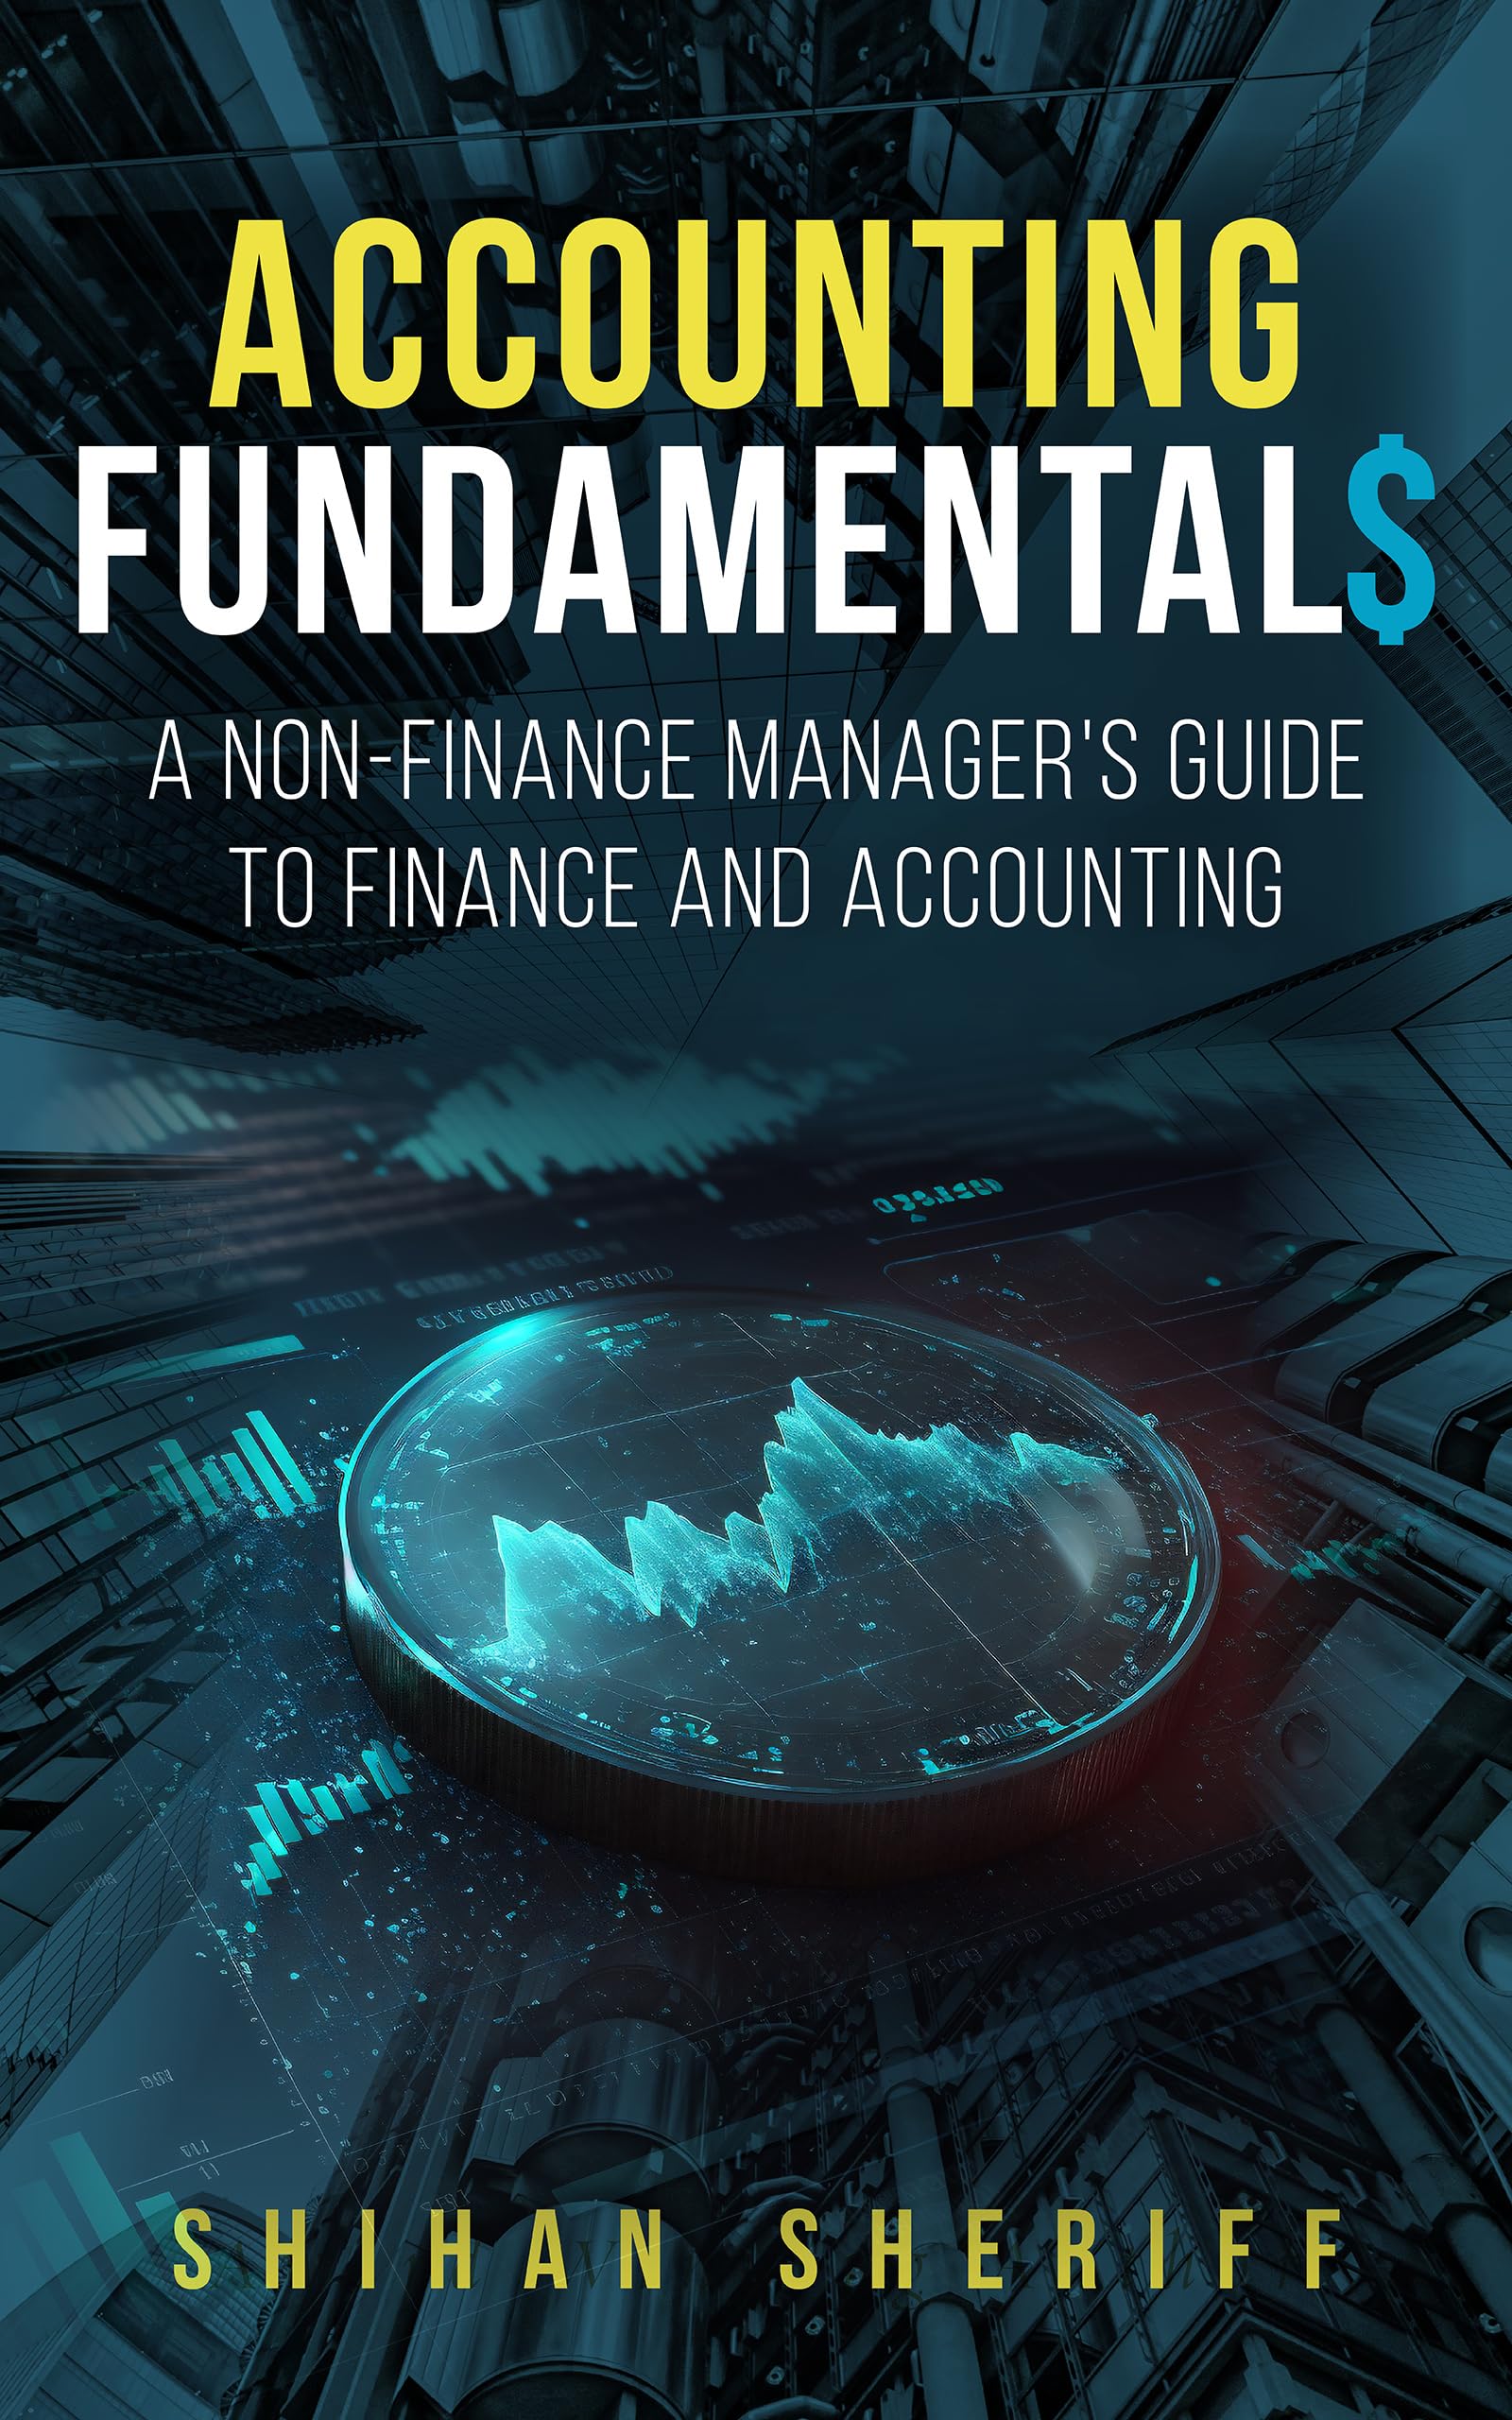 Accounting Fundamentals: A Non-Finance Manager's Guide to Finance and Accounting